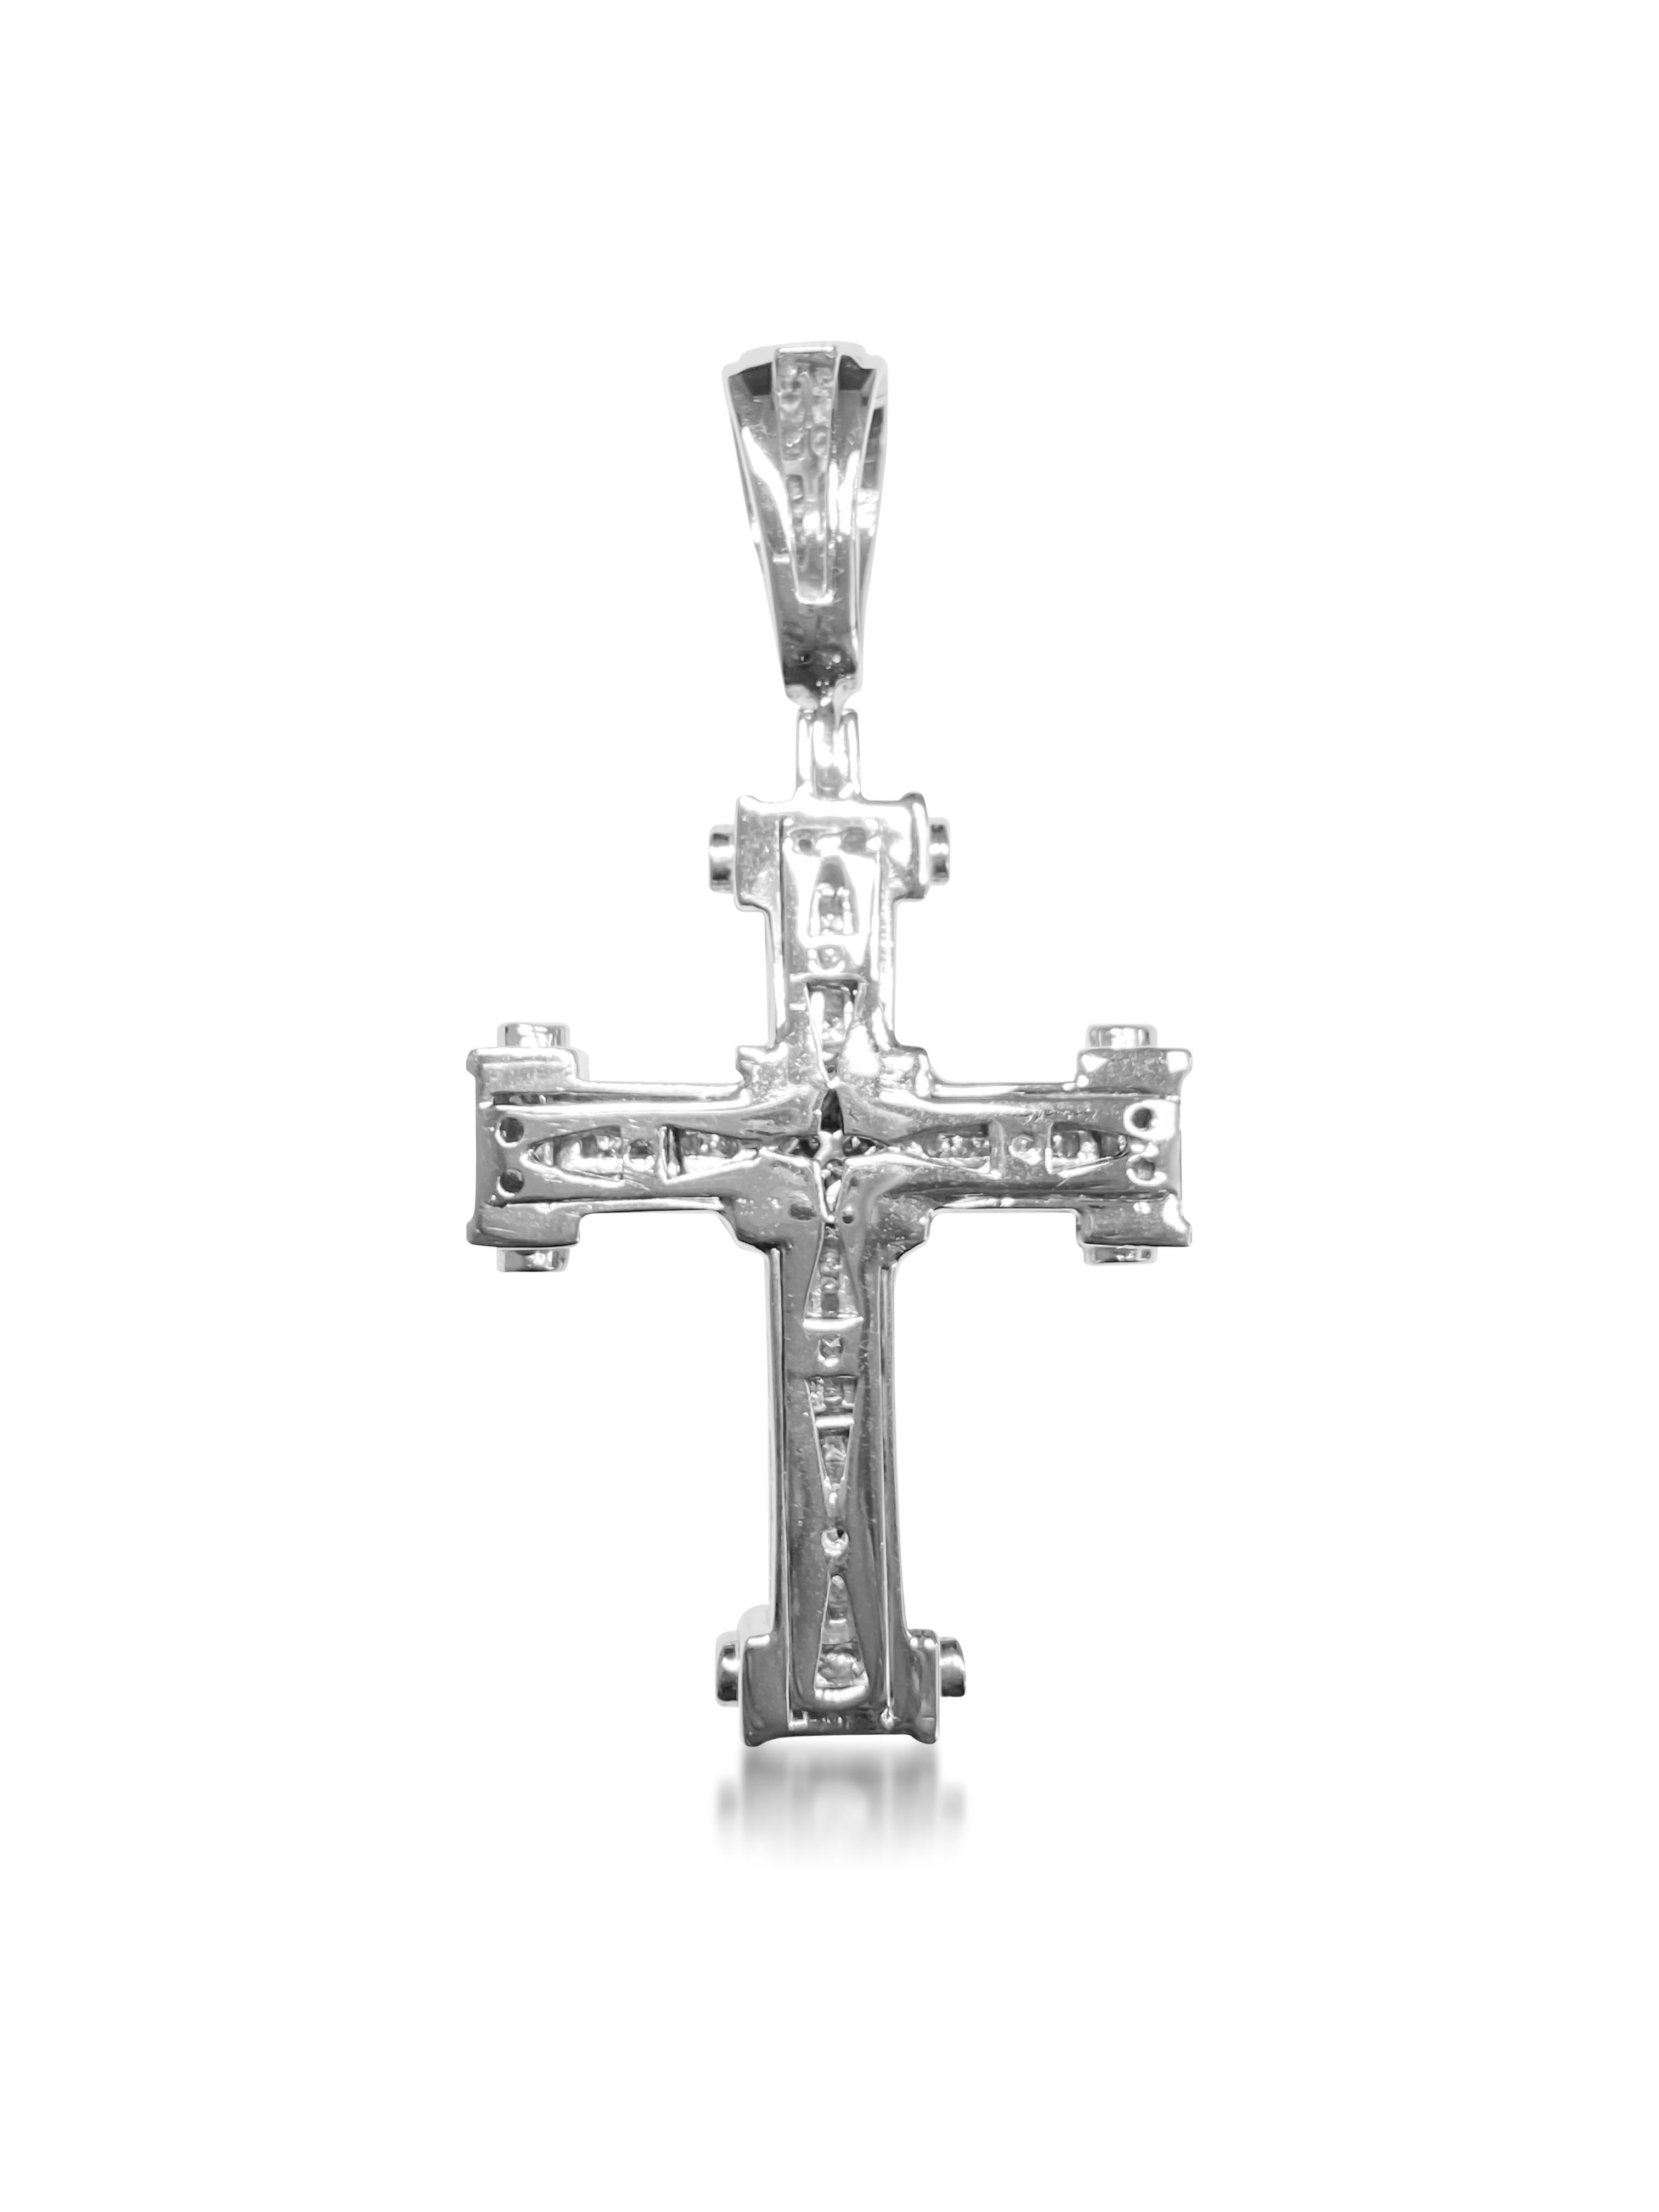 Crafted from elegant 14k white gold, this unisex religious cross pendant features a total diamond weight of 5 carats, boasting VS-SI clarity and G color for unparalleled brilliance. Weighing 35.15 grams, this exquisite piece showcases meticulous